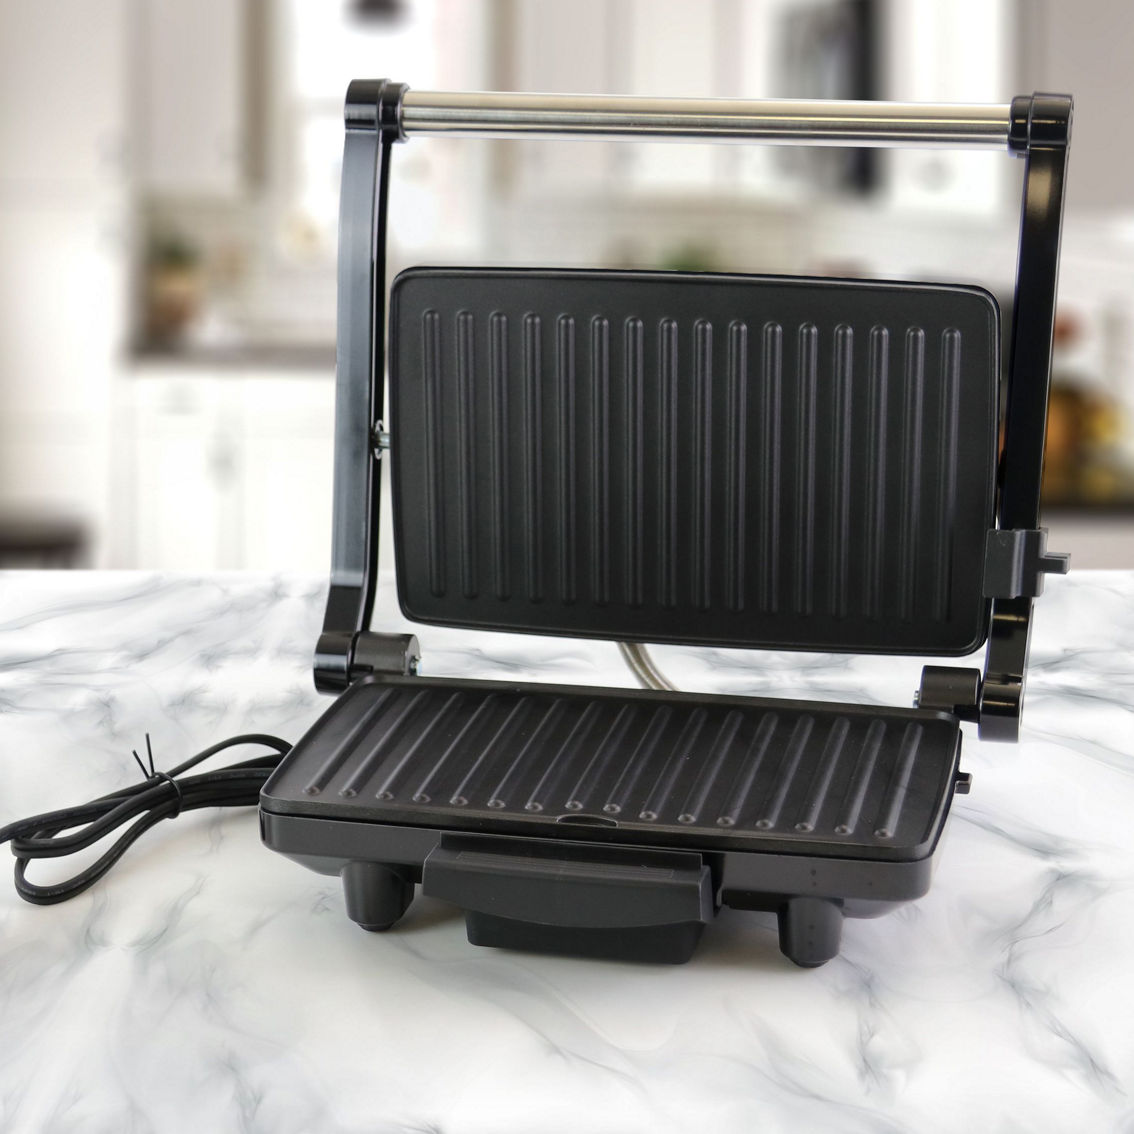 Better Chef Stainless Steel Panini Press Gourmet Sandwich Maker - Image 2 of 5